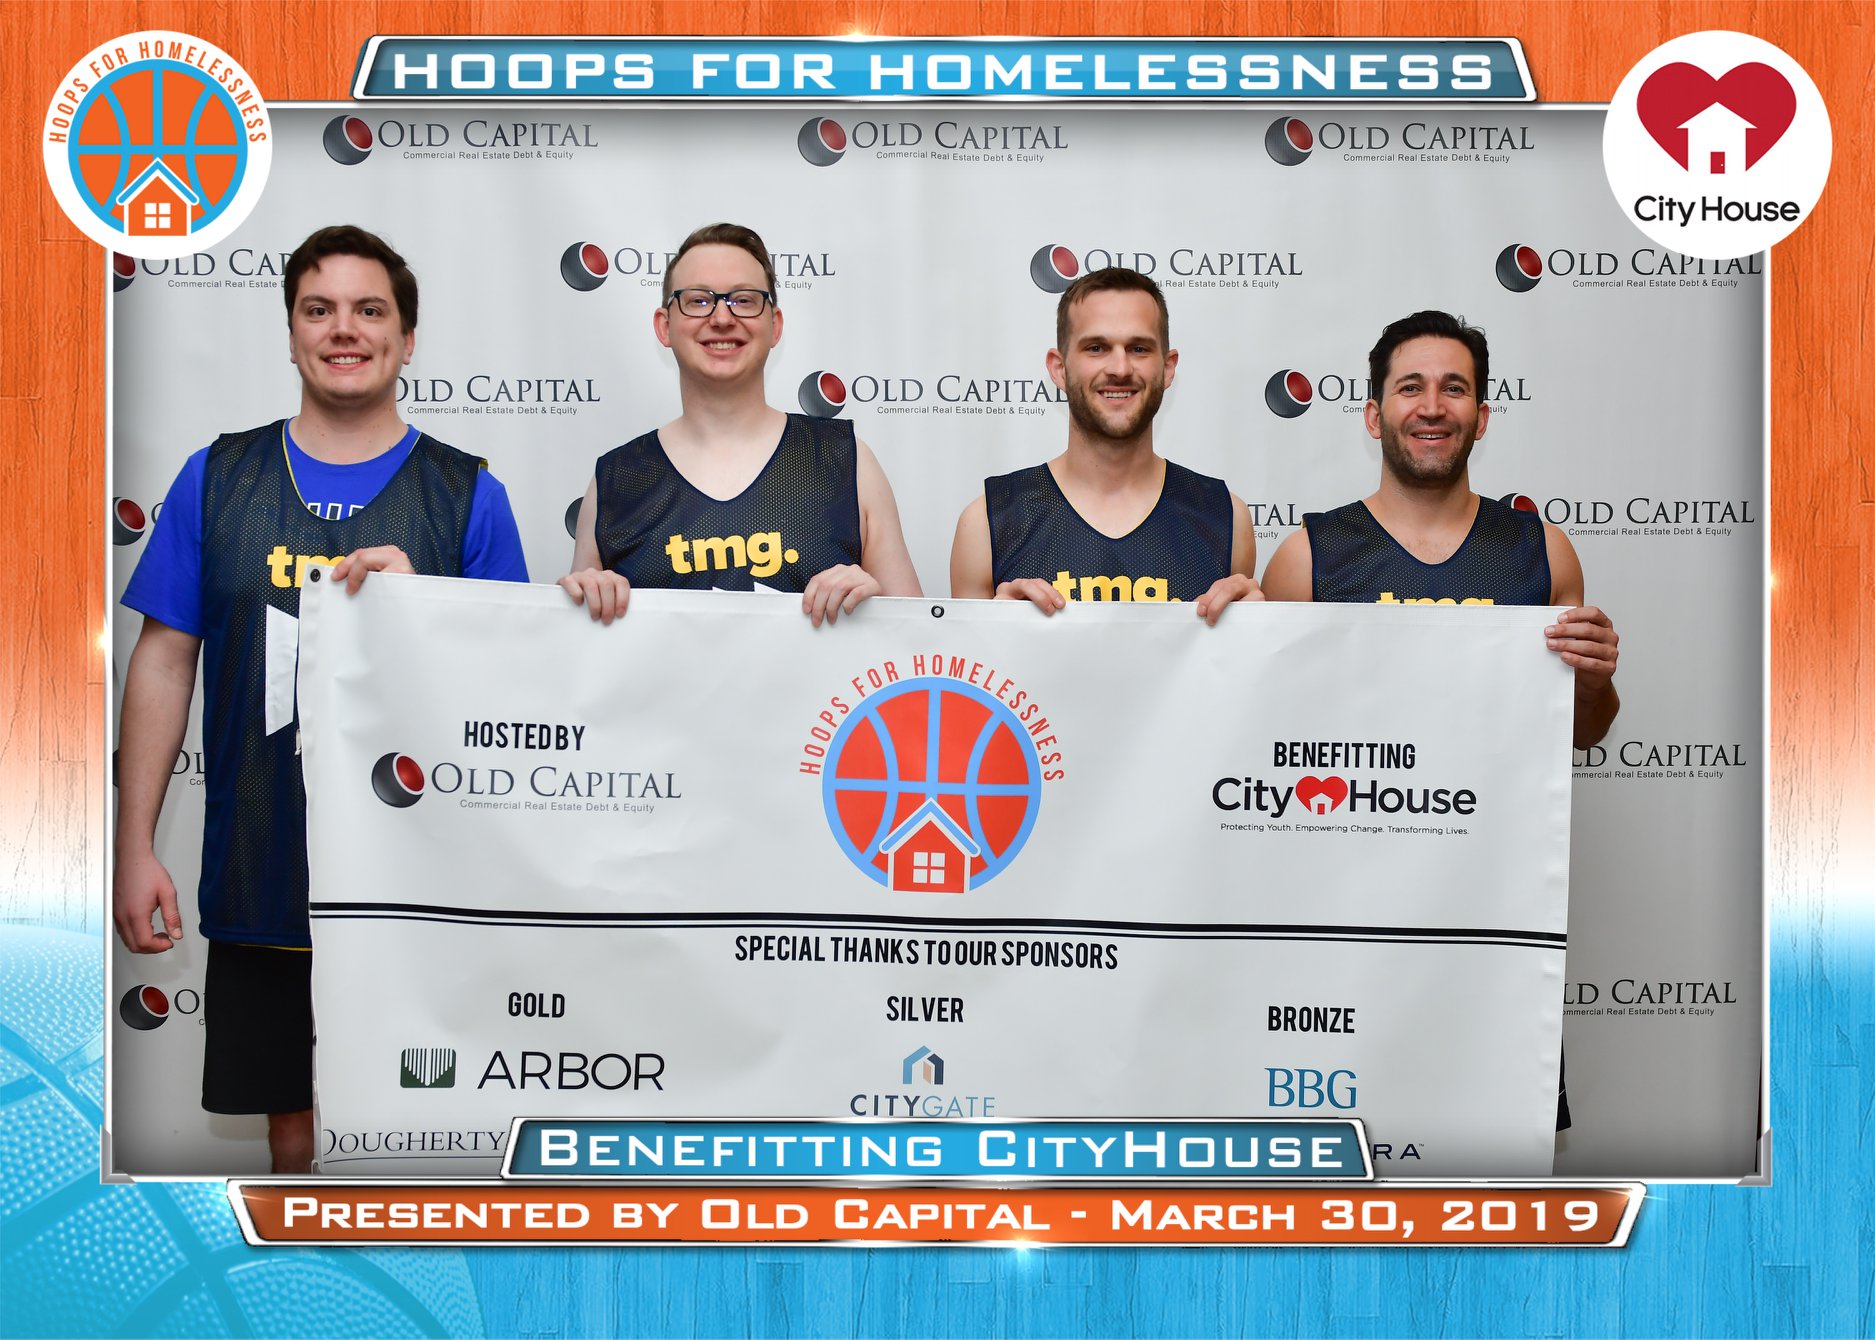 TMG members taking a picture for Hoops for Homeless by Old Capital.